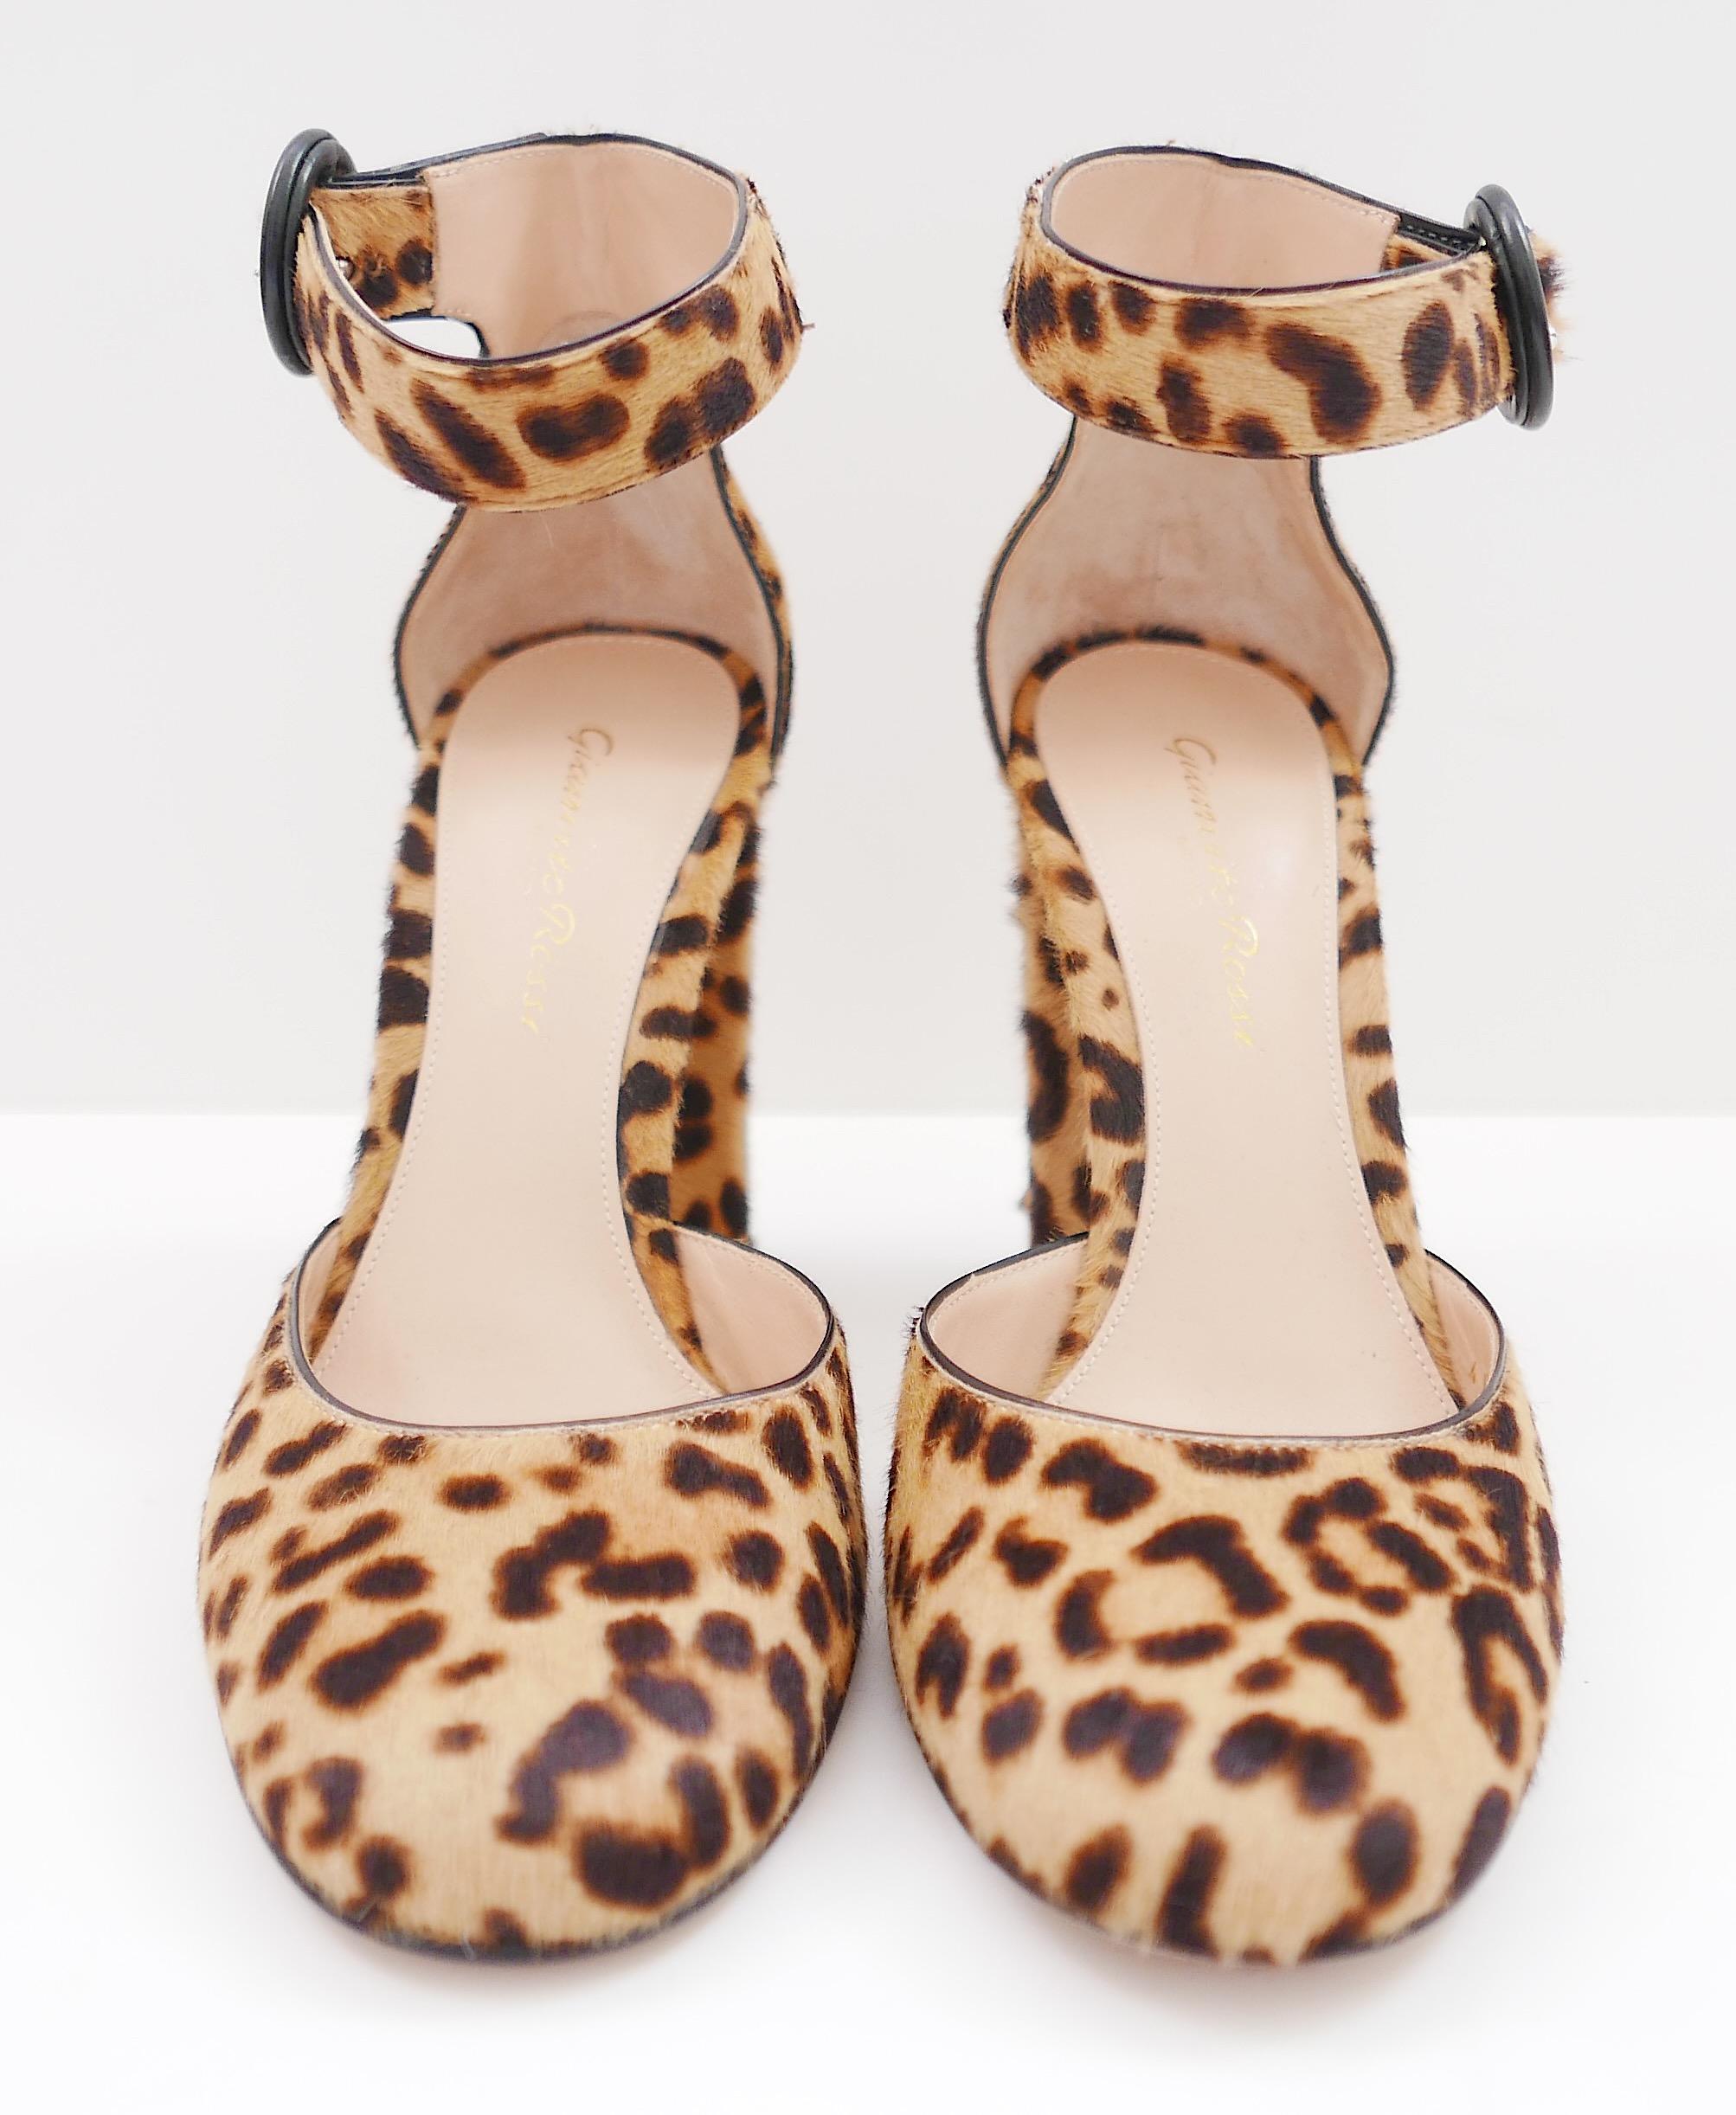 Cute and chic Gianvito Rossi leopard calf hair ankle strap pumps - bought for £700 and unworn with dustbag. Made from calf hair with black patent buckles, they have rounded toes and chunky heels. Size 36. Measure approx 9.25” heel to toe and heel 4”.